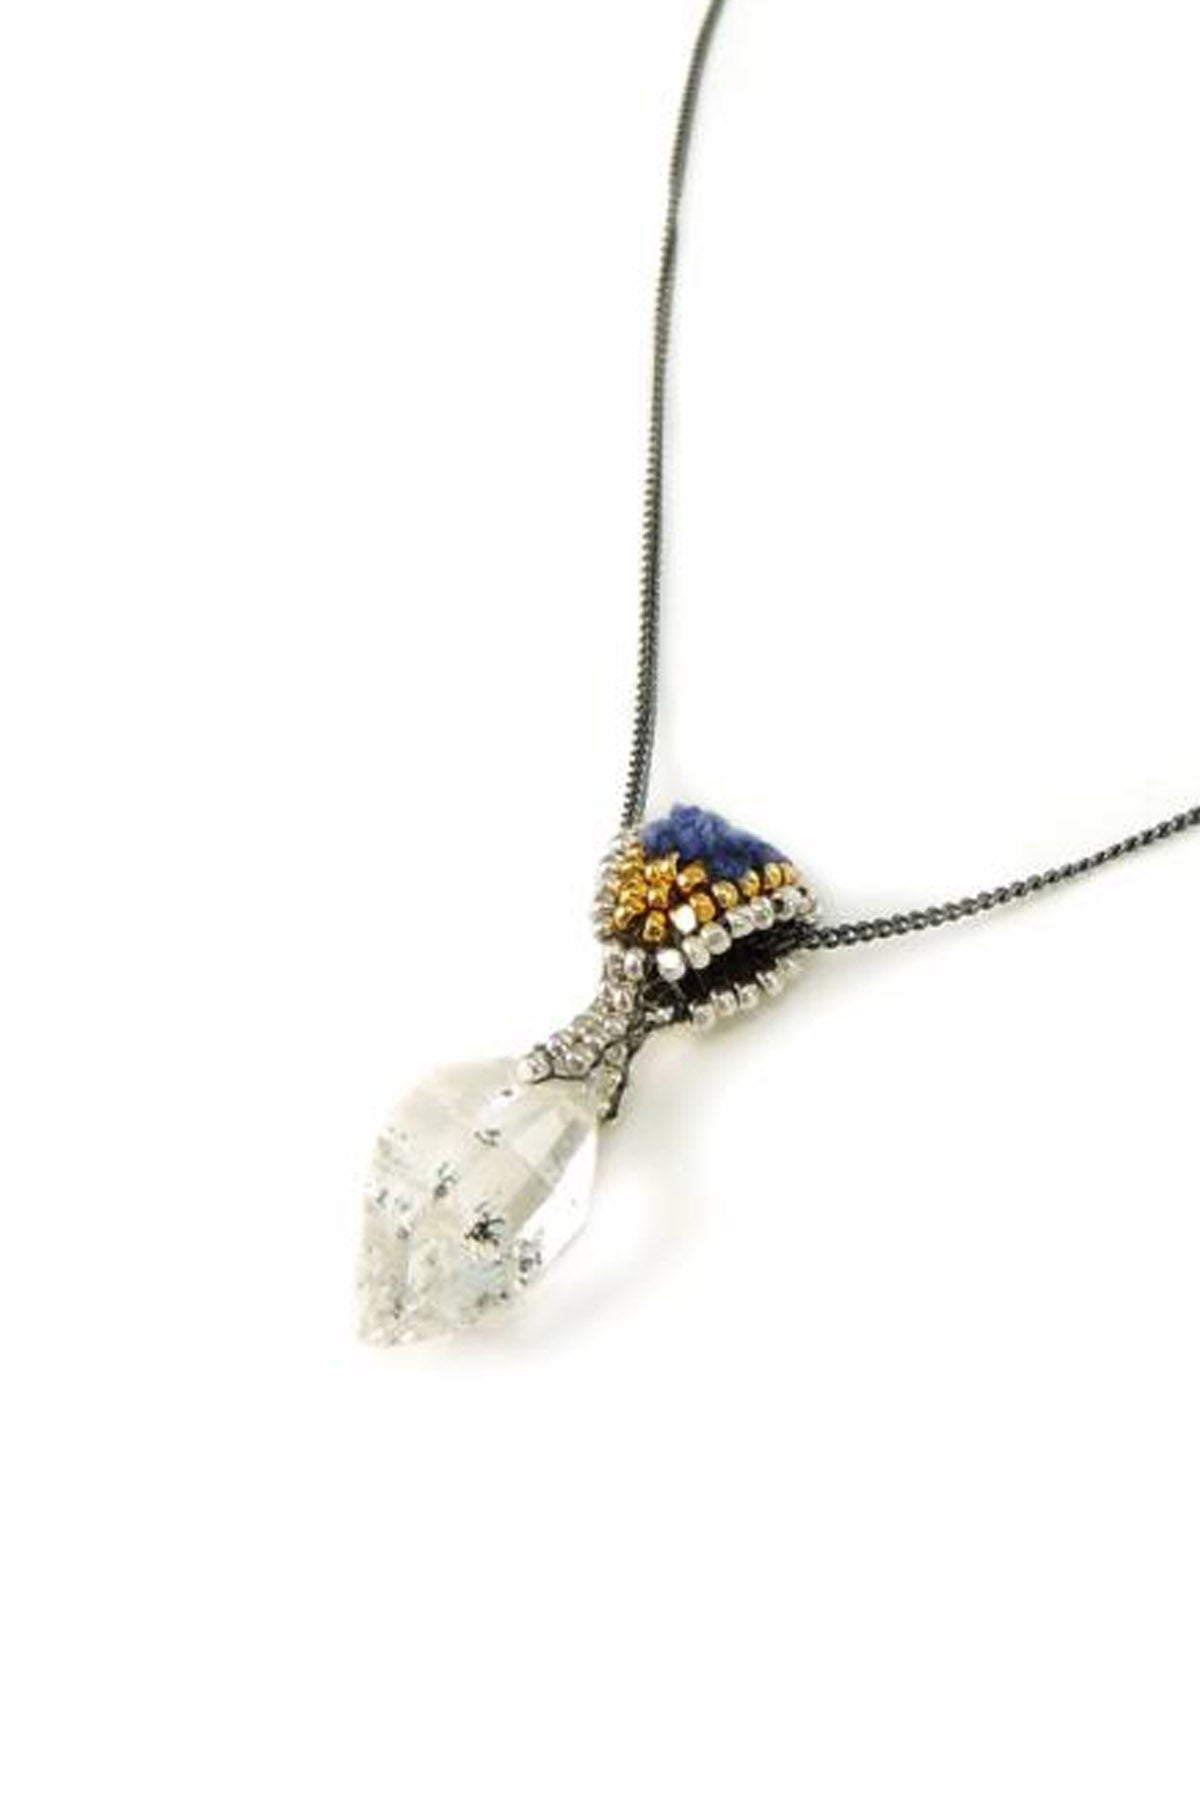 ISHI NECKLACE TRIANGLE HERKIMER BLUE BEADS - Y2021